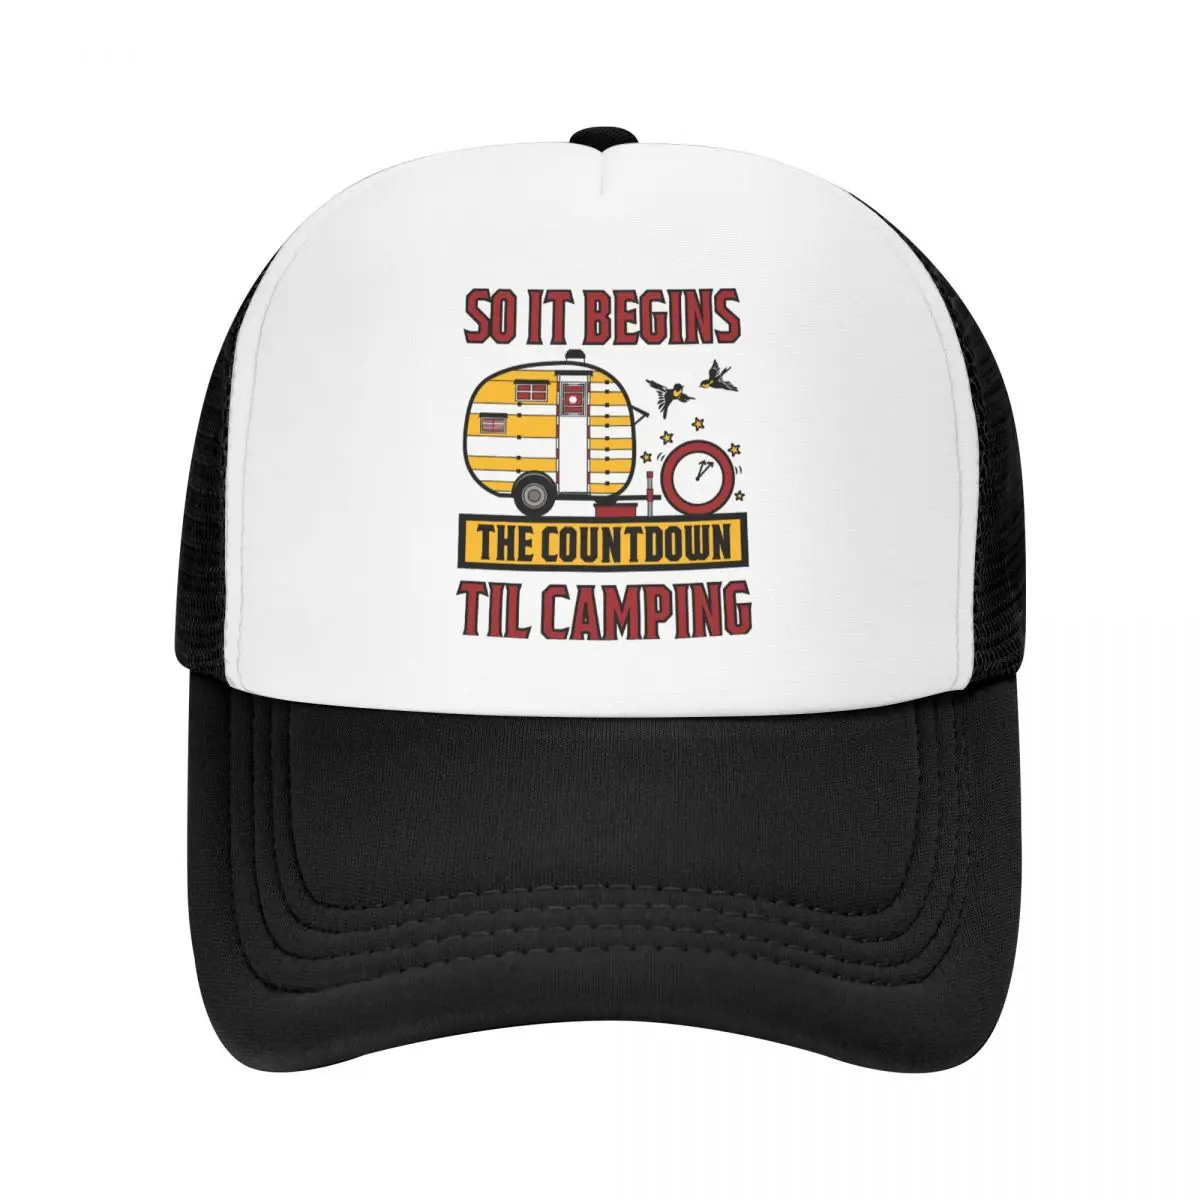 

So It Begins The Countdown Til Camping Trucker Hat Adjustable Unisex Funny Campers Quote Baseball Cap Summer Hats Snapback Caps